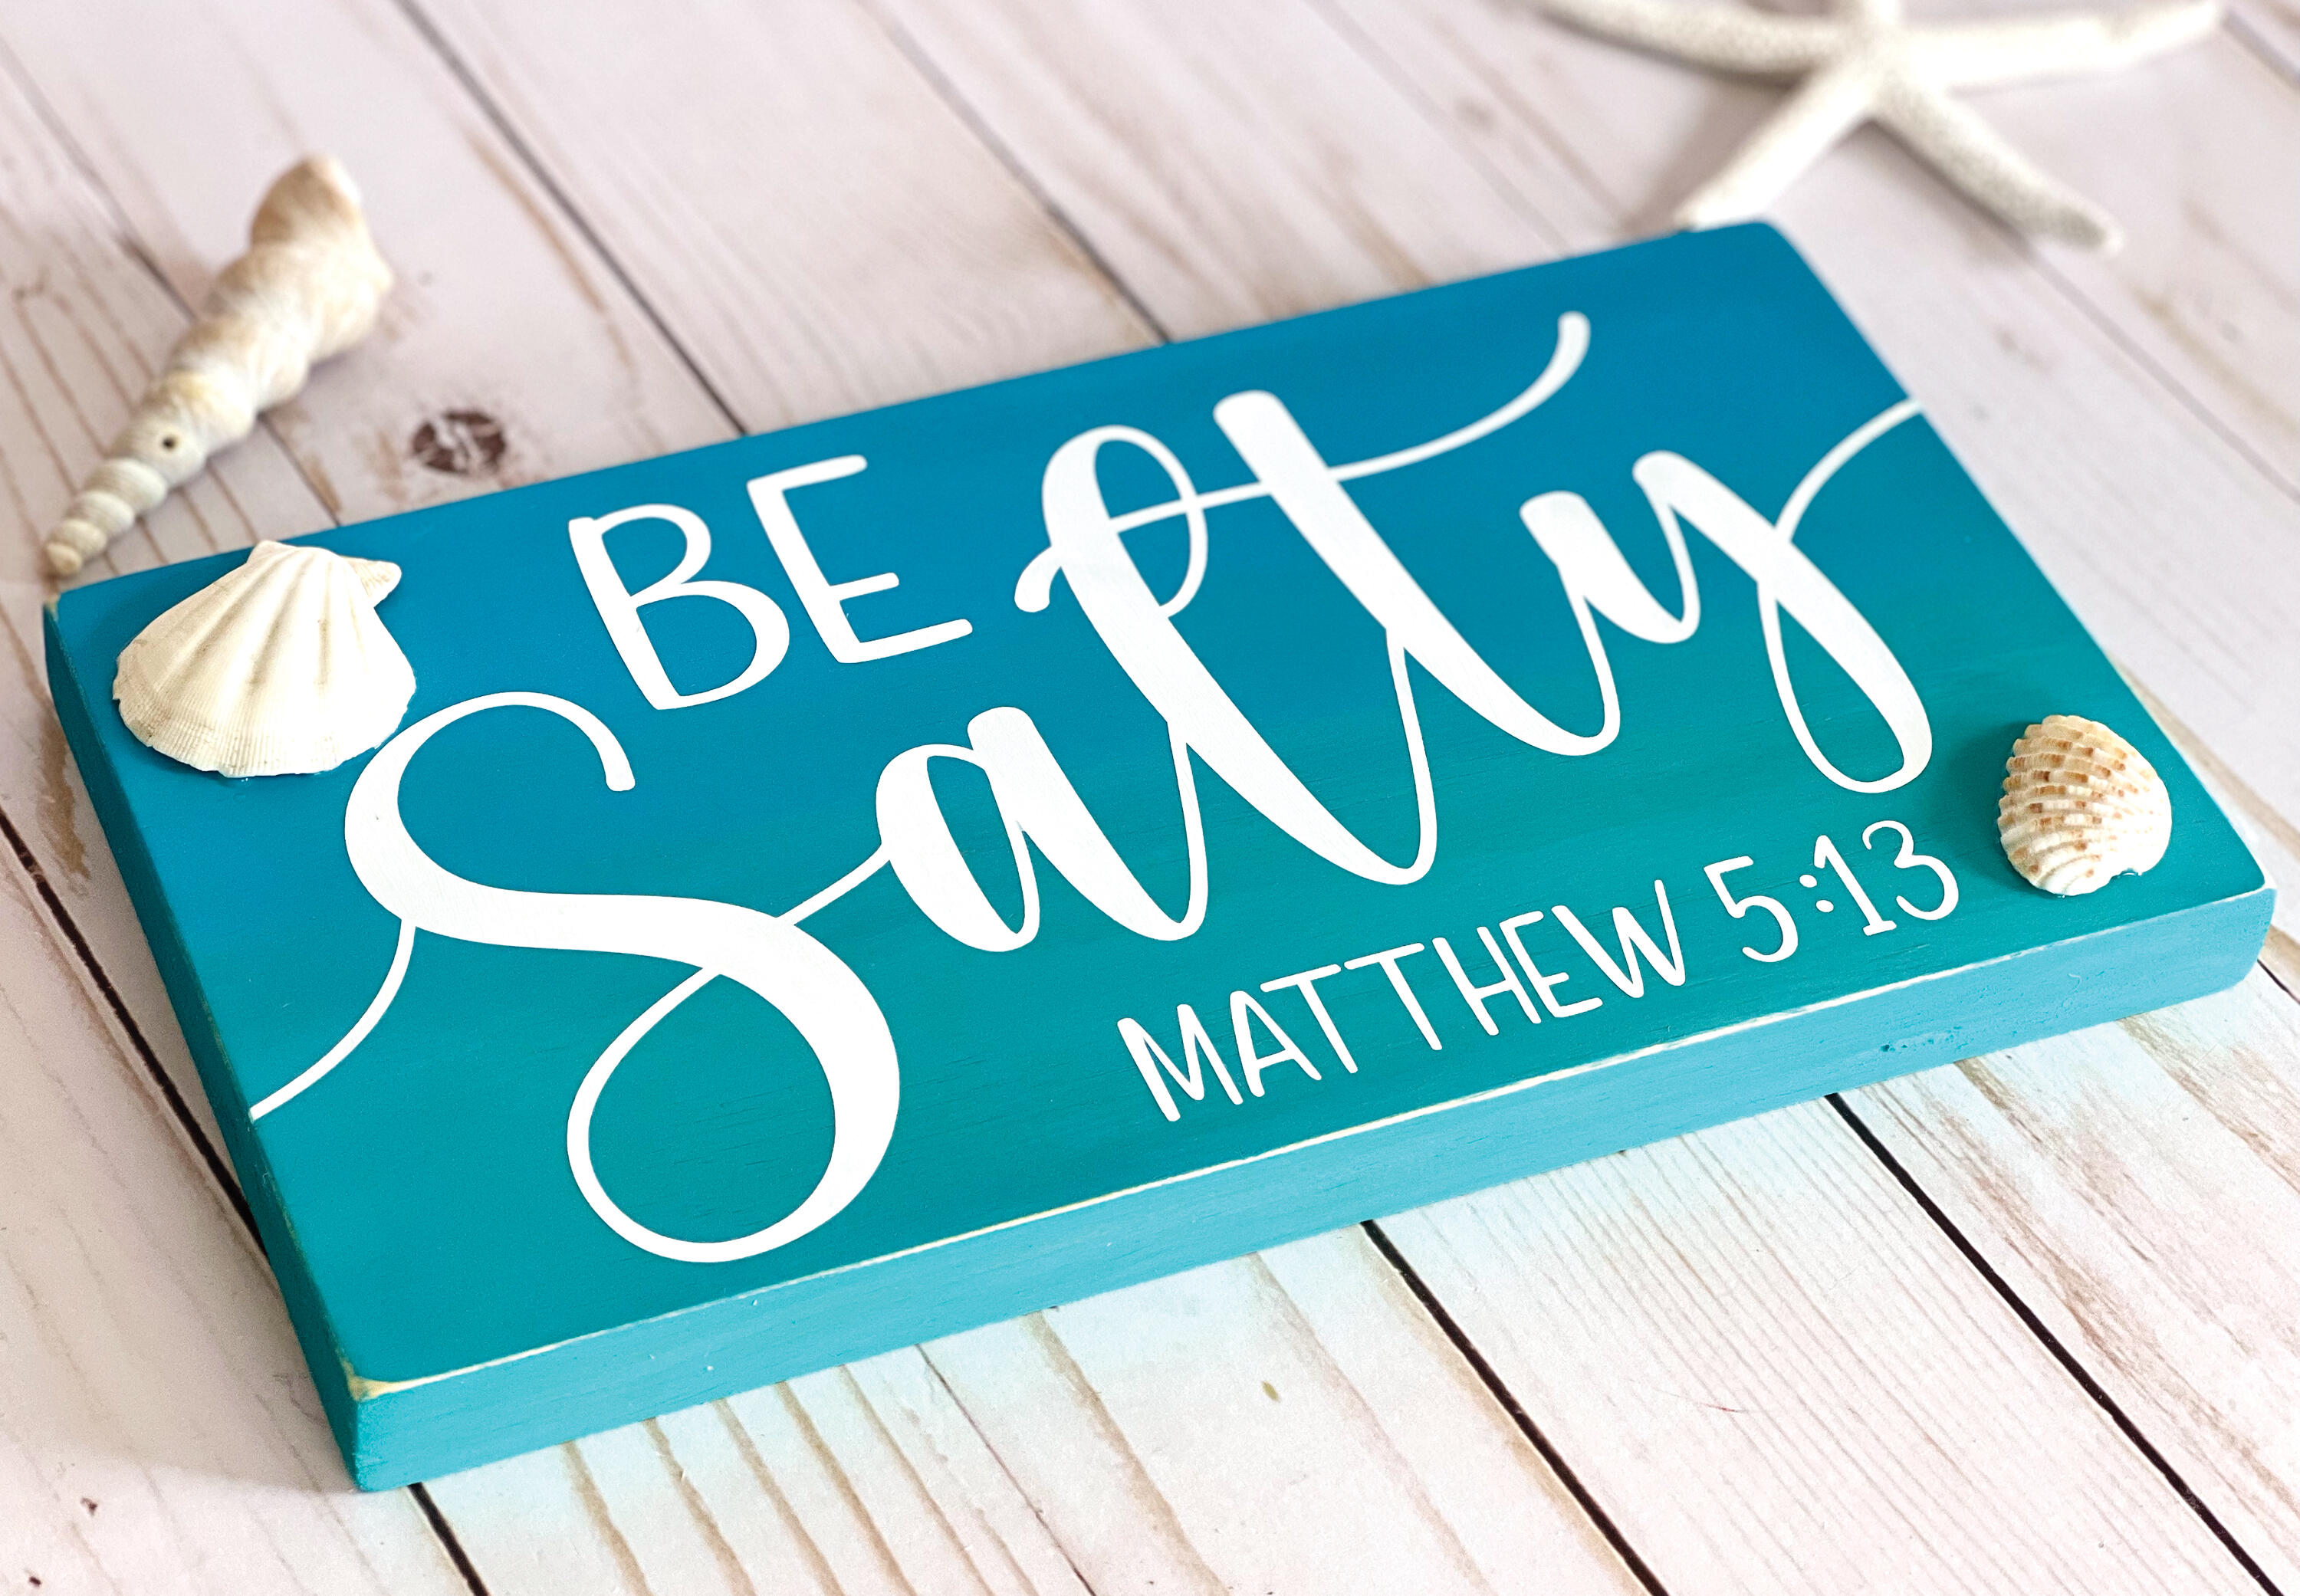 Be Salty Sign, Matthew 5:13 Scripture Sign, Coastal Decor, Salt Life Sign, Beachy decor, Scripture decor, Bible Verse Signs, Bible quote sign, Christian Signs, Beach house sign, Coastal colors Sign